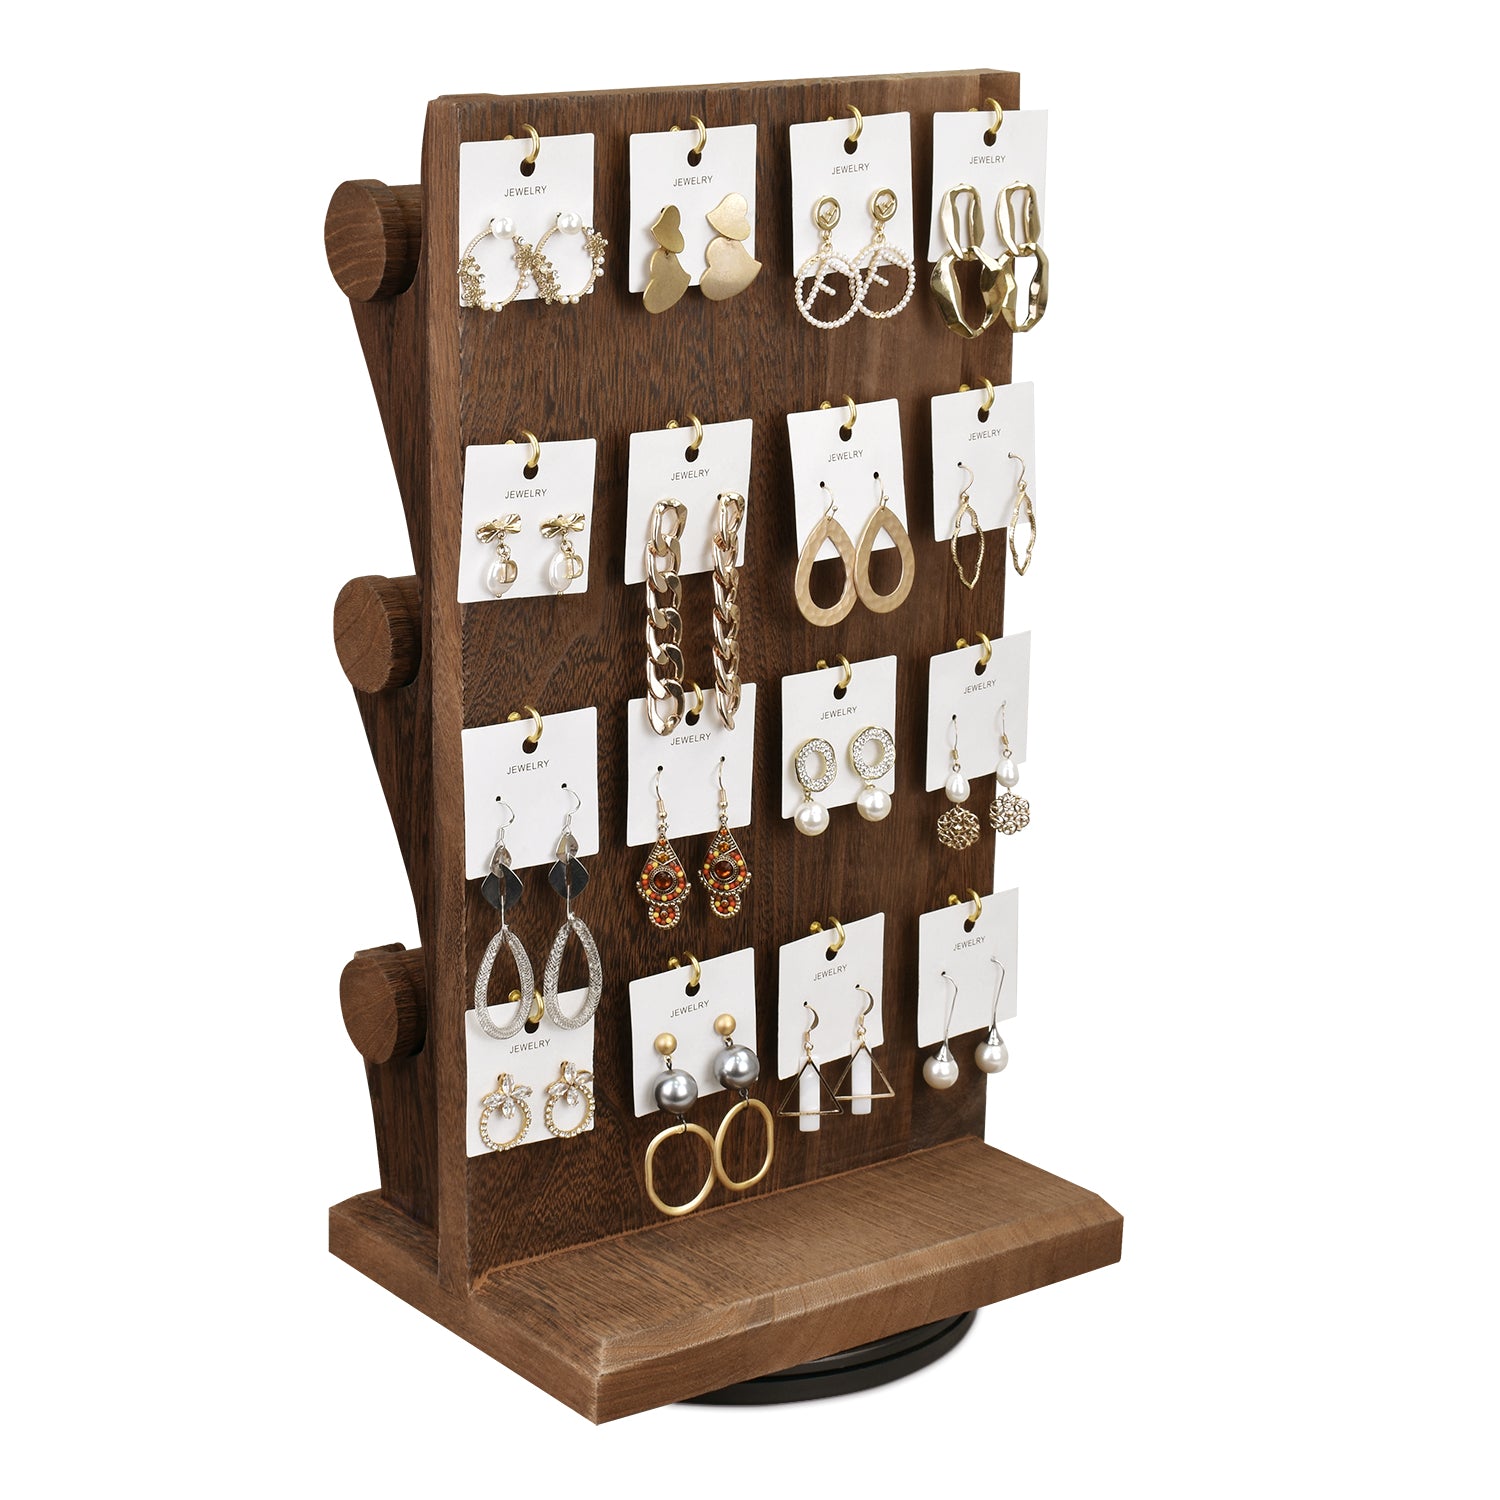 Multifunctional Jewelry Stand Organizer With Hooks Jewelry Display Rack For  Earrings Necklaces Bracelets Holder With Wooden